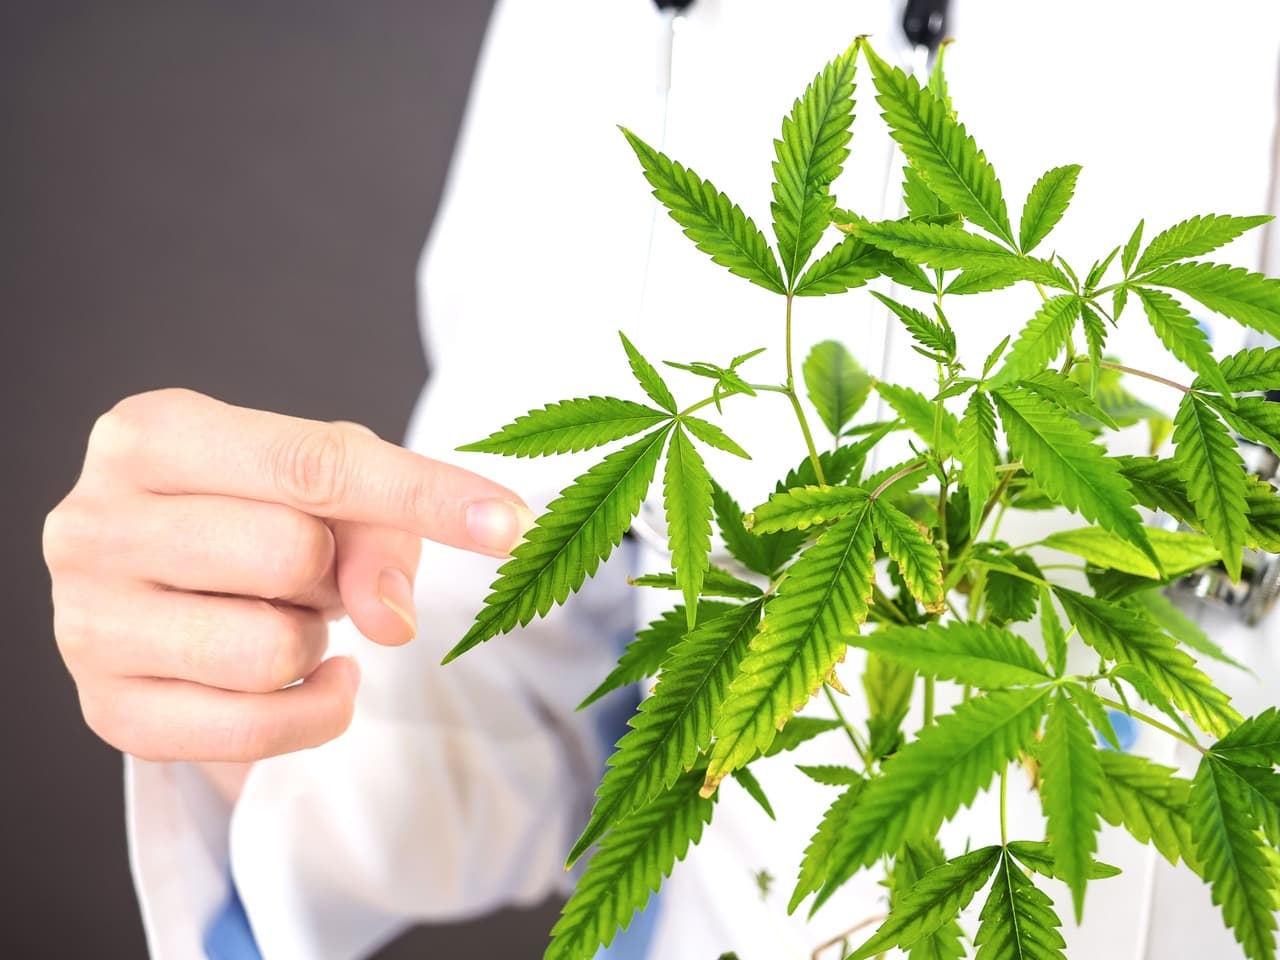 Top 9 Cannabis Diseases You Need to Watch Out For